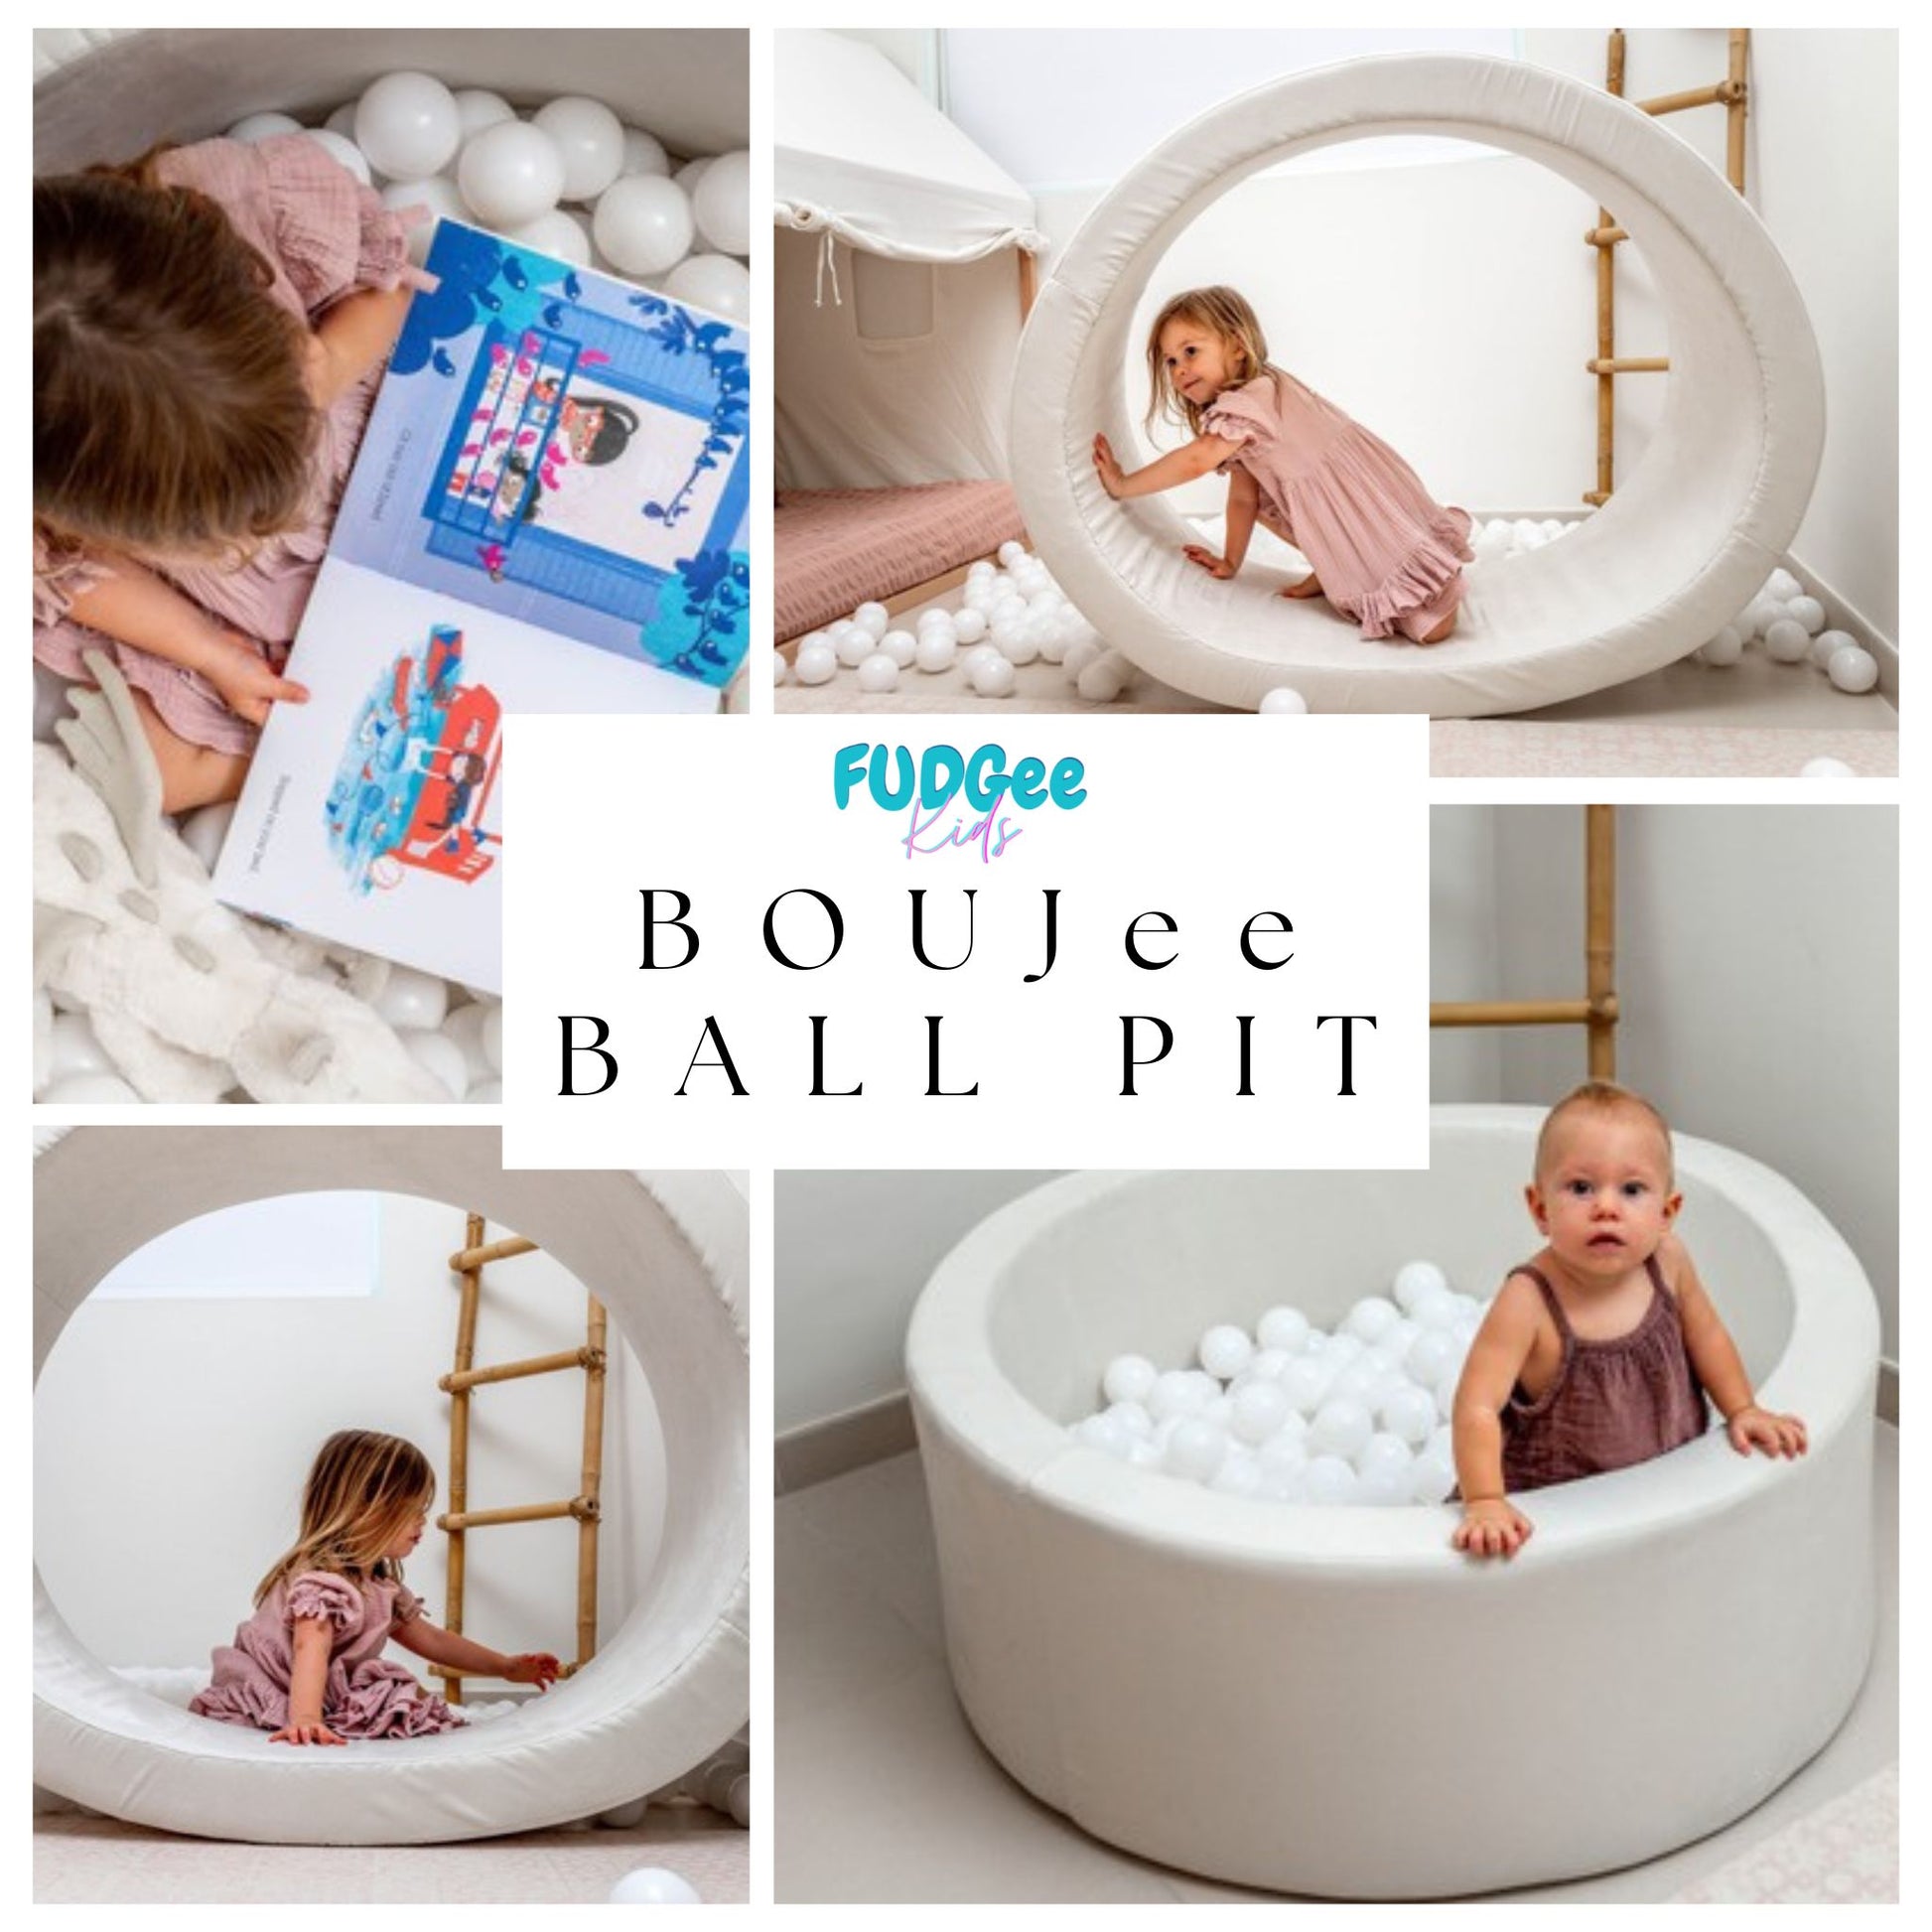 Ball pit/pool for babies and toddlers - off-white with vibrant balls